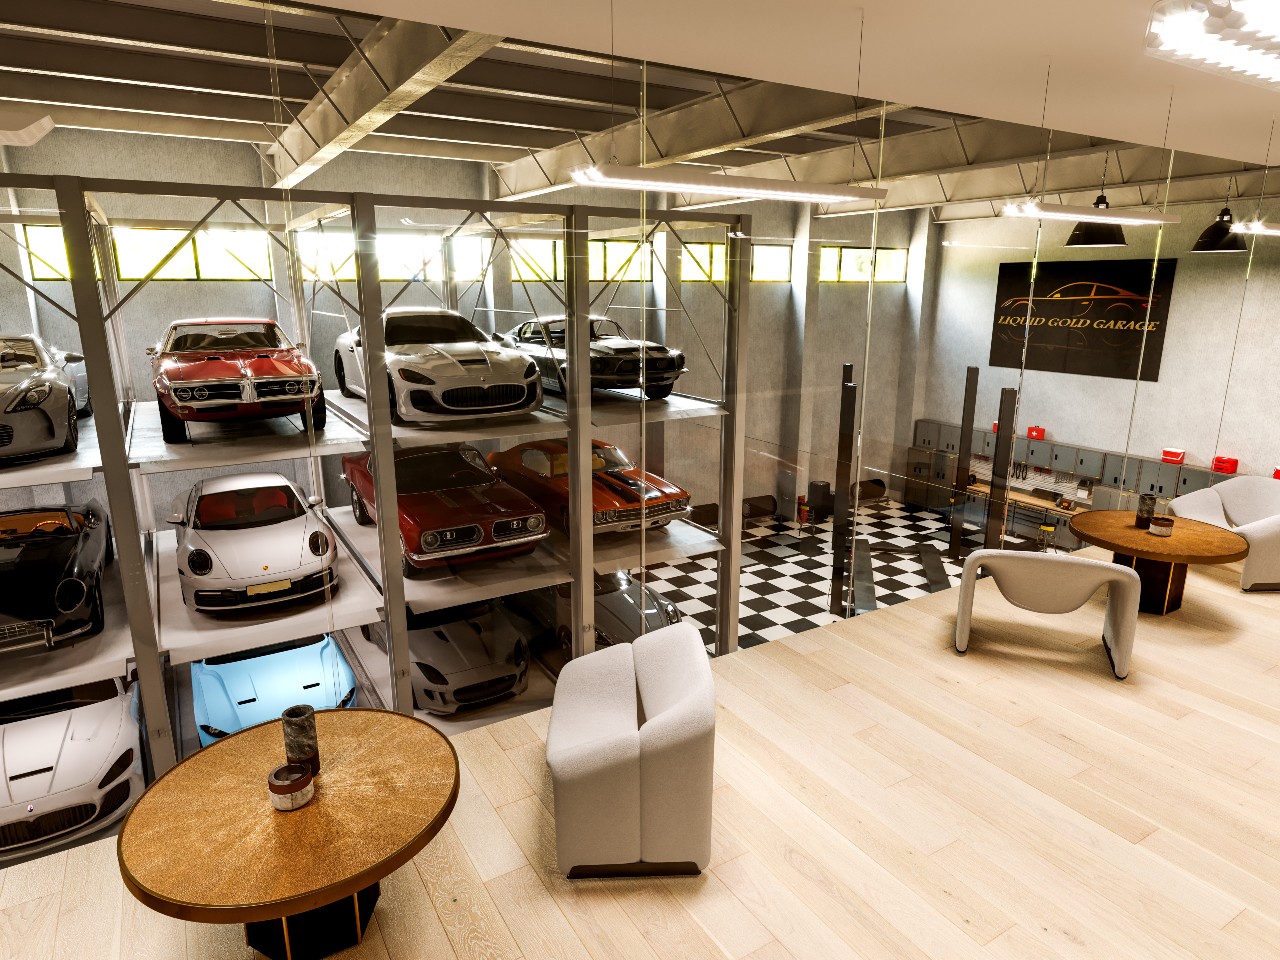 Golden garage that will take luxury car care to next level